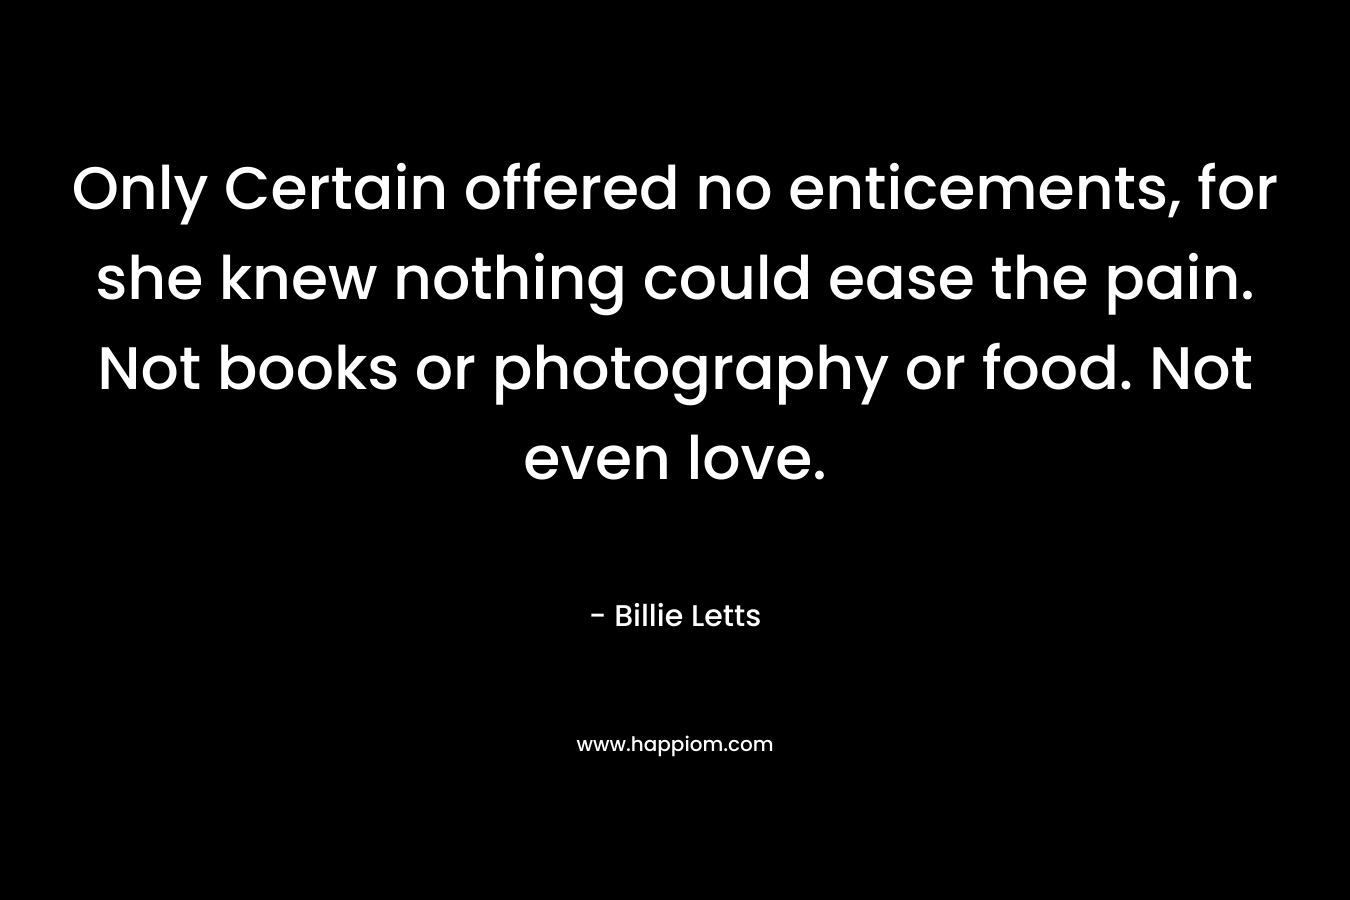 Only Certain offered no enticements, for she knew nothing could ease the pain. Not books or photography or food. Not even love. – Billie Letts